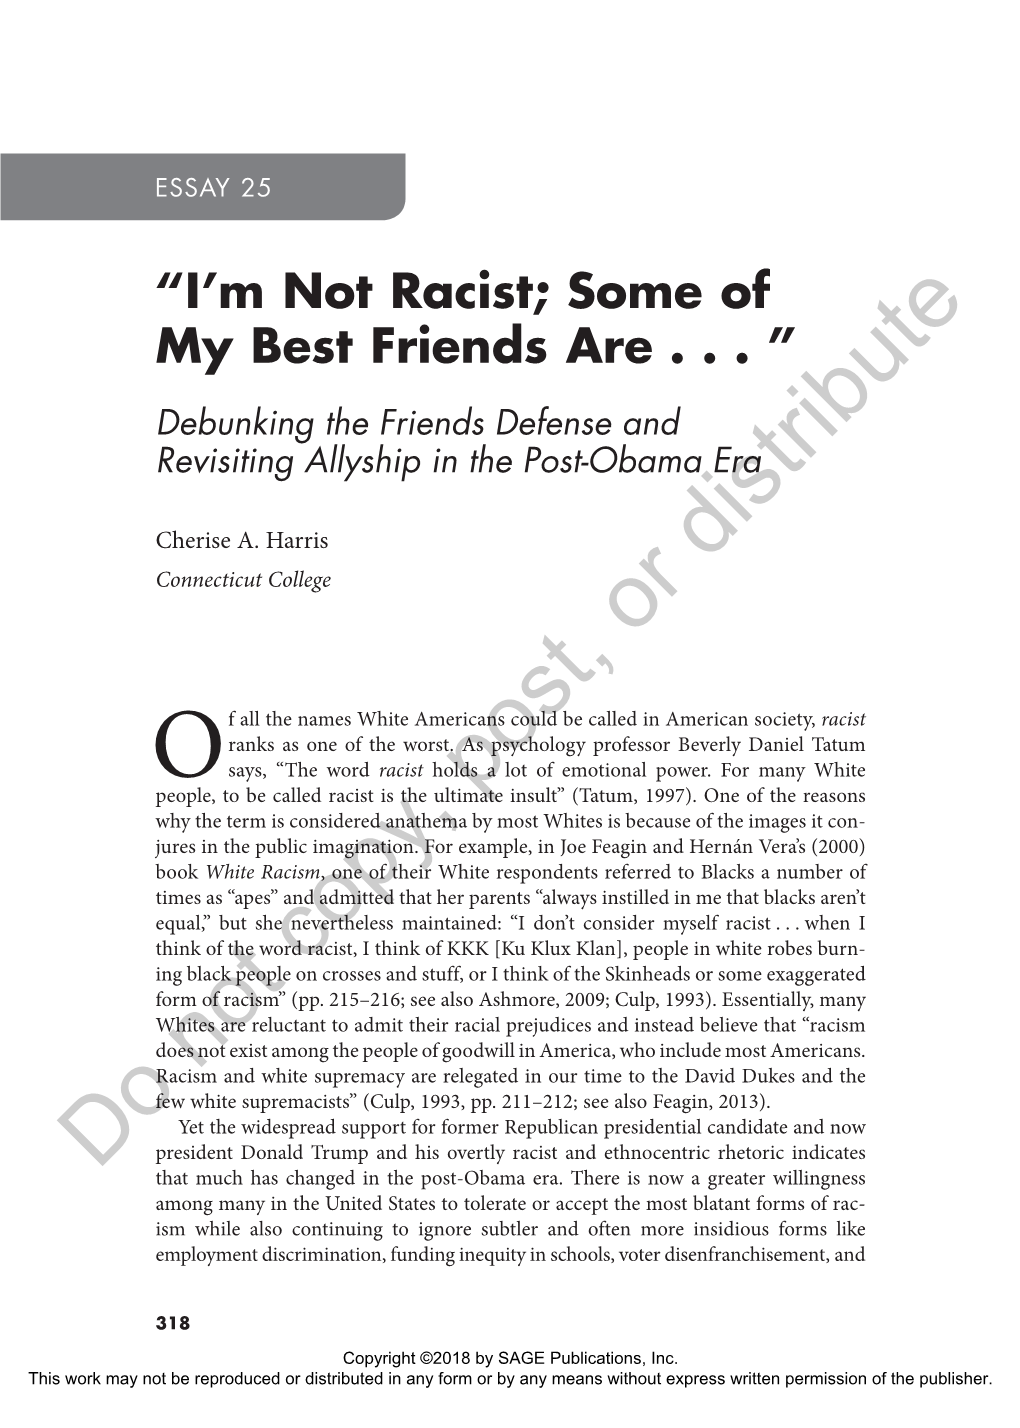 “I'm Not Racist; Some of My Best Friends Are .